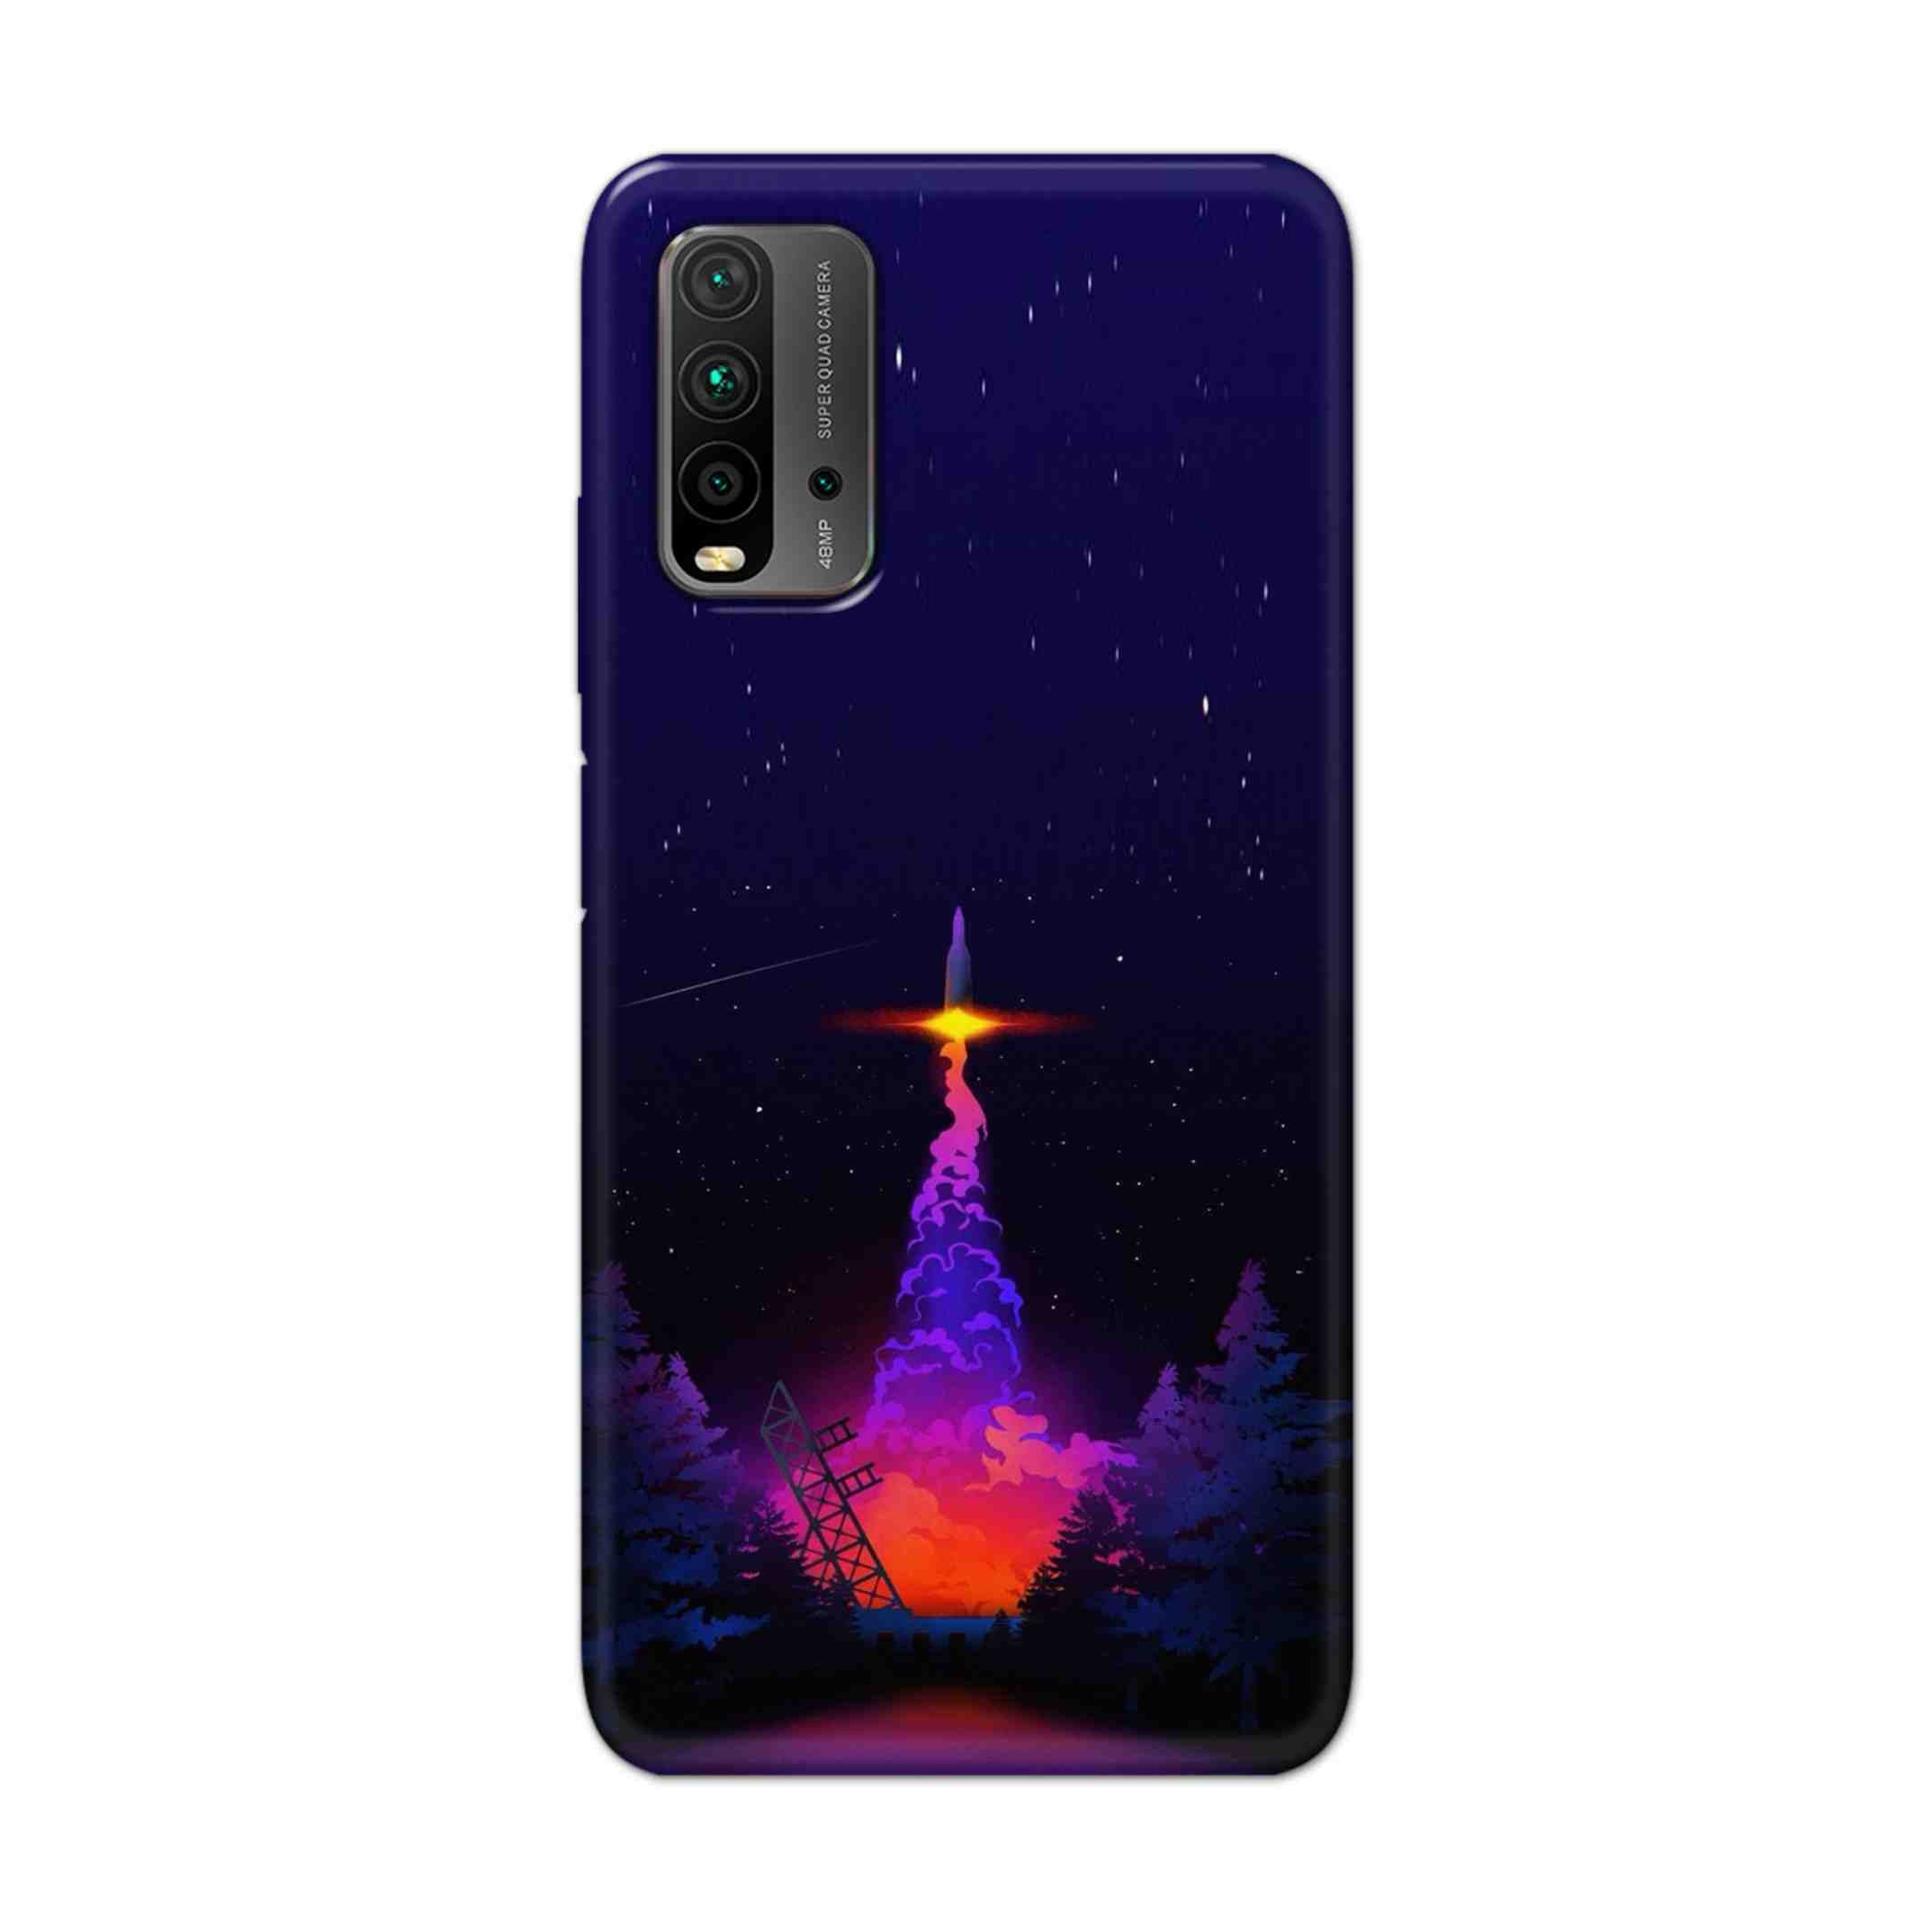 Buy Rocket Launching Hard Back Mobile Phone Case Cover For Redmi 9 Power Online